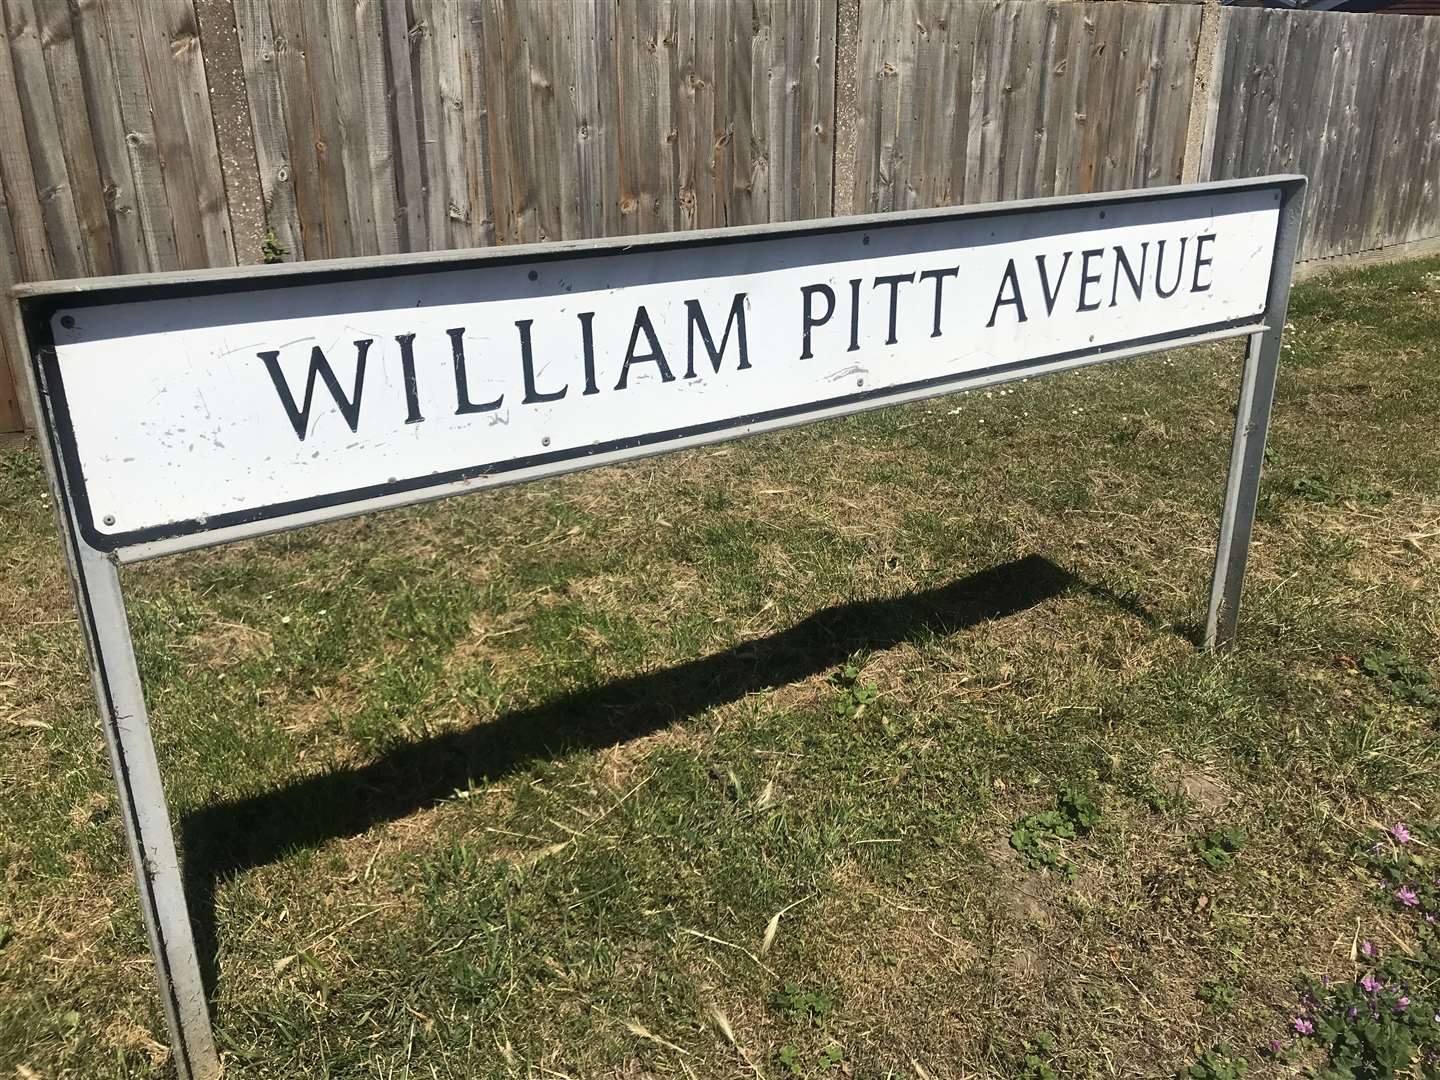 At least two suspicious items were found in a house in William Pitt Avenue in Deal